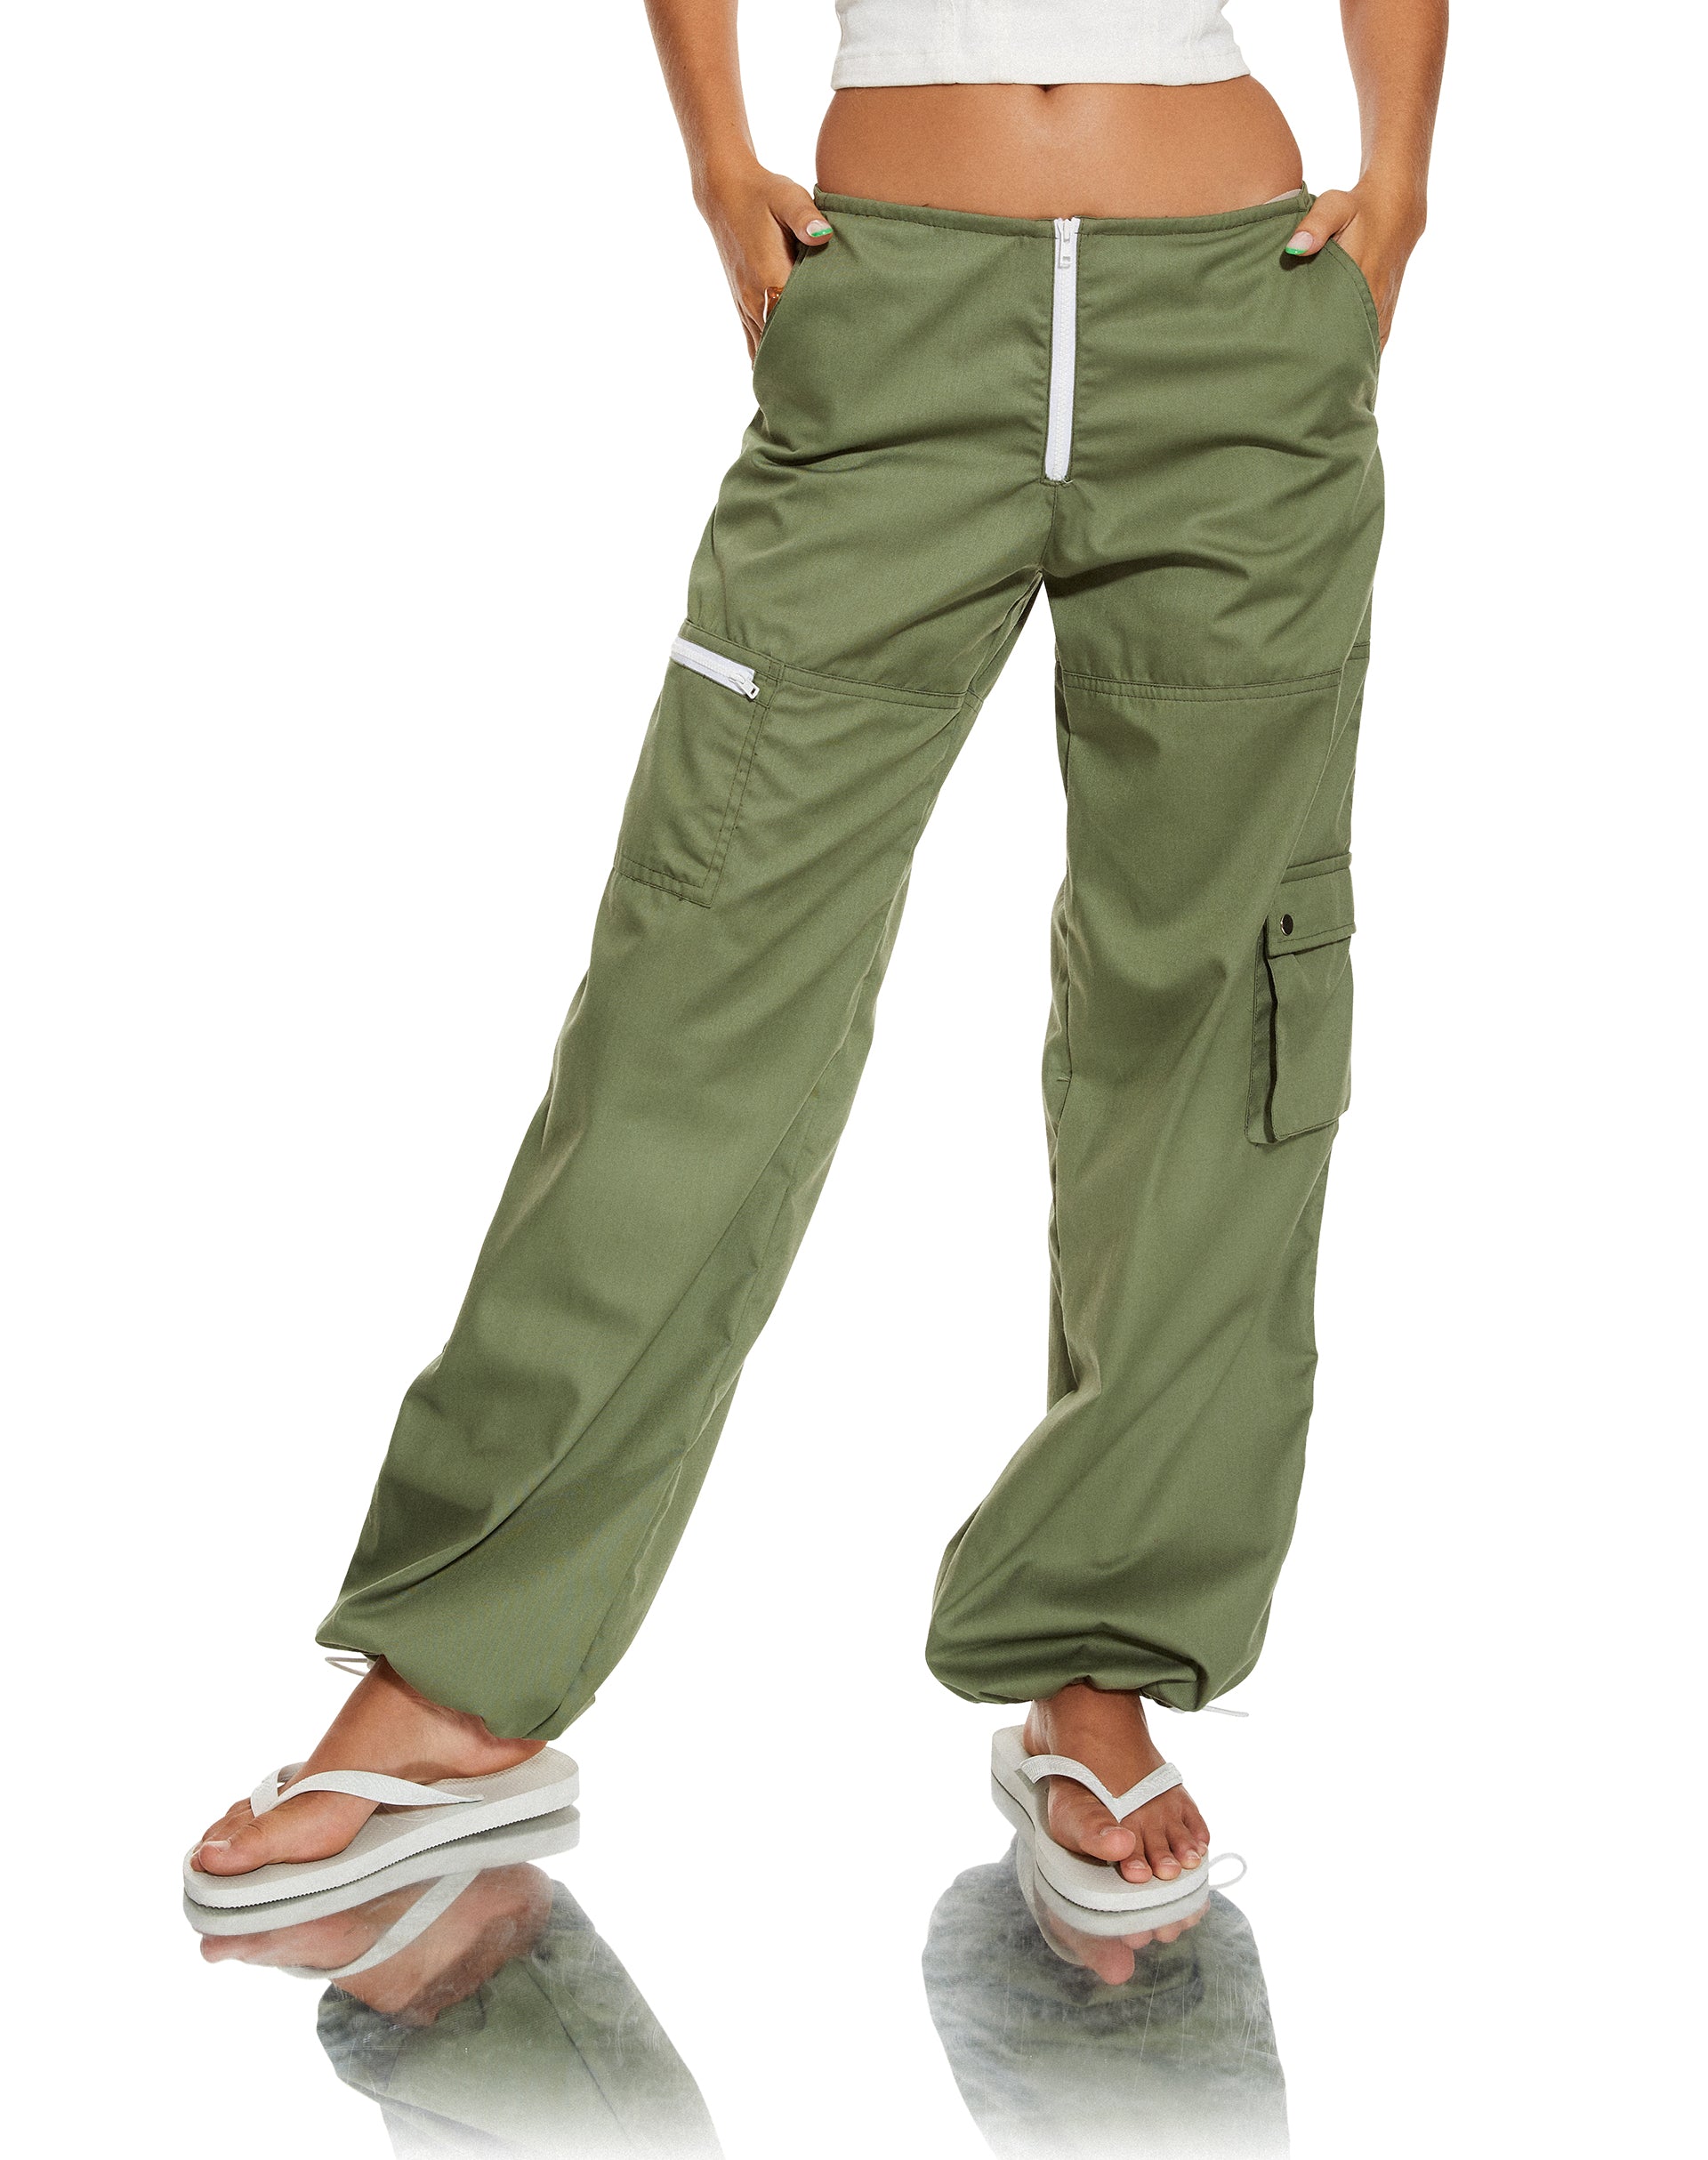 image of Xander Cargo Trouser in Cotton Drill Olive